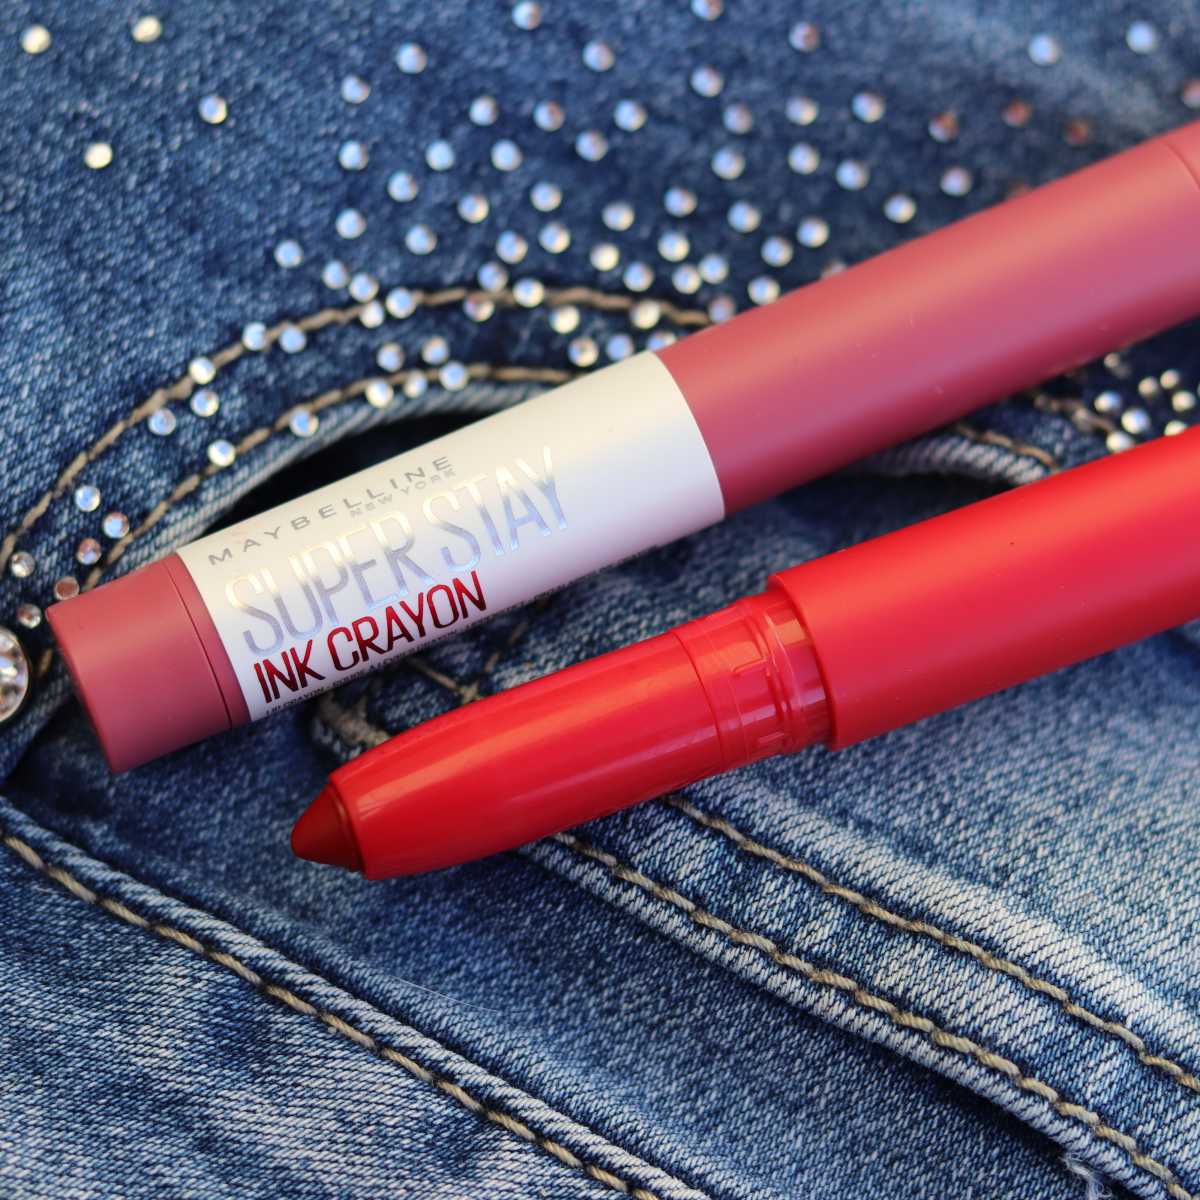 Maybelline Superstay Matte Ink Crayon Review